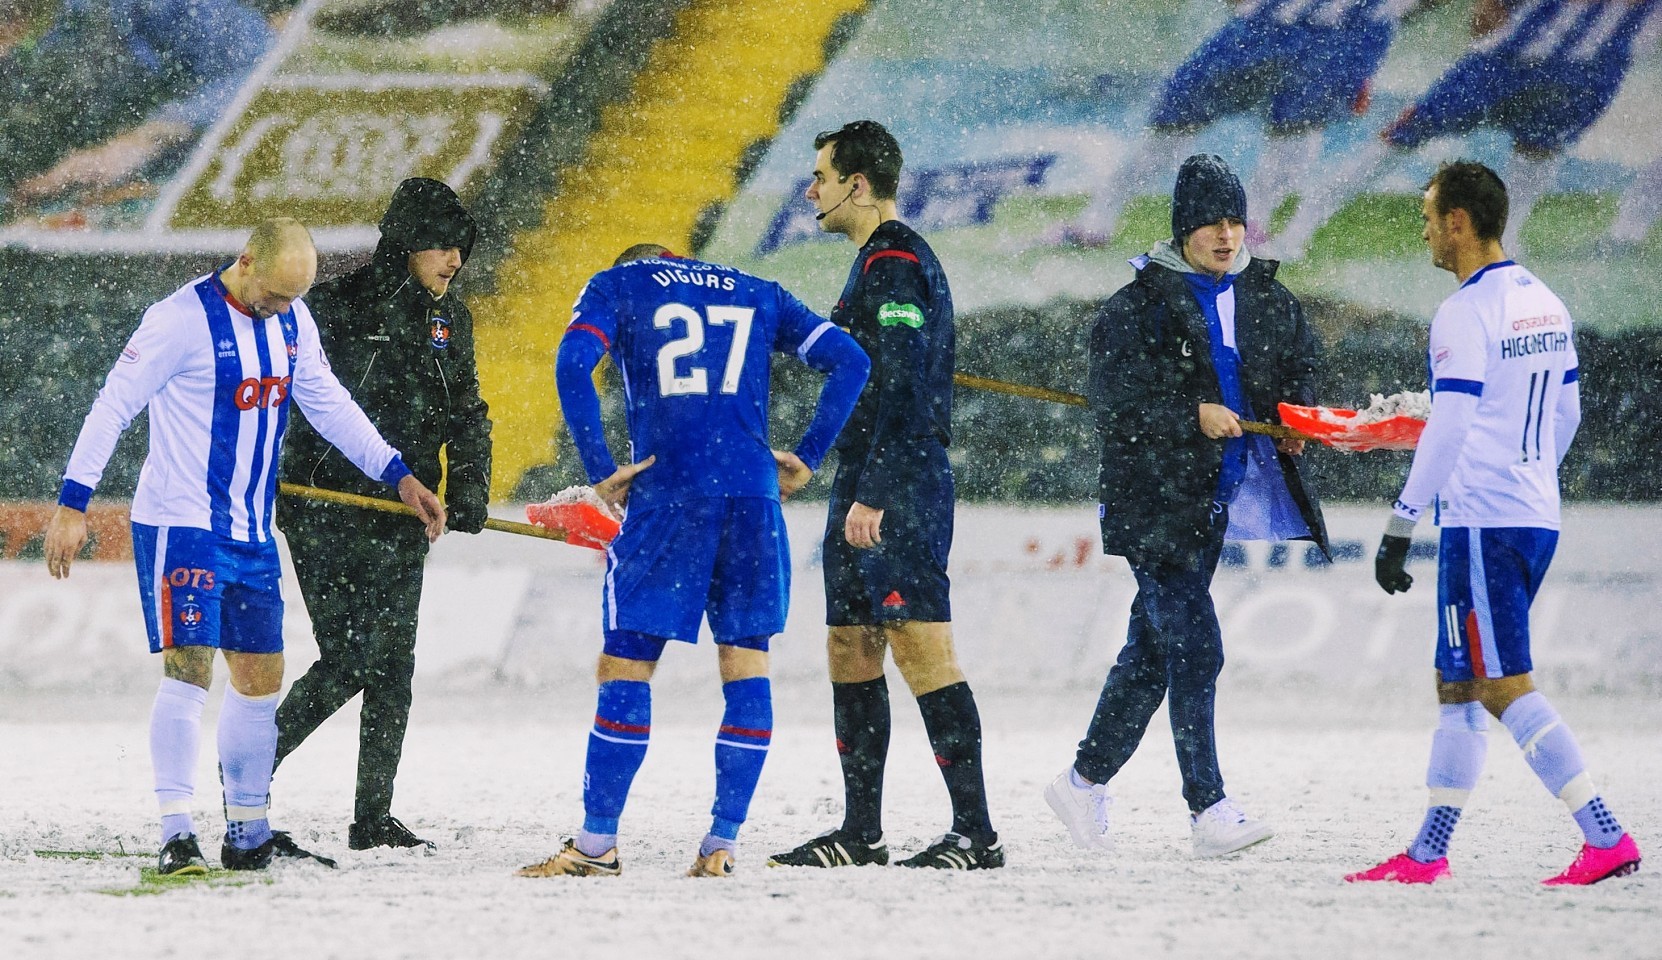 Play is stopped as groundsmen attempt to clear the snow again.